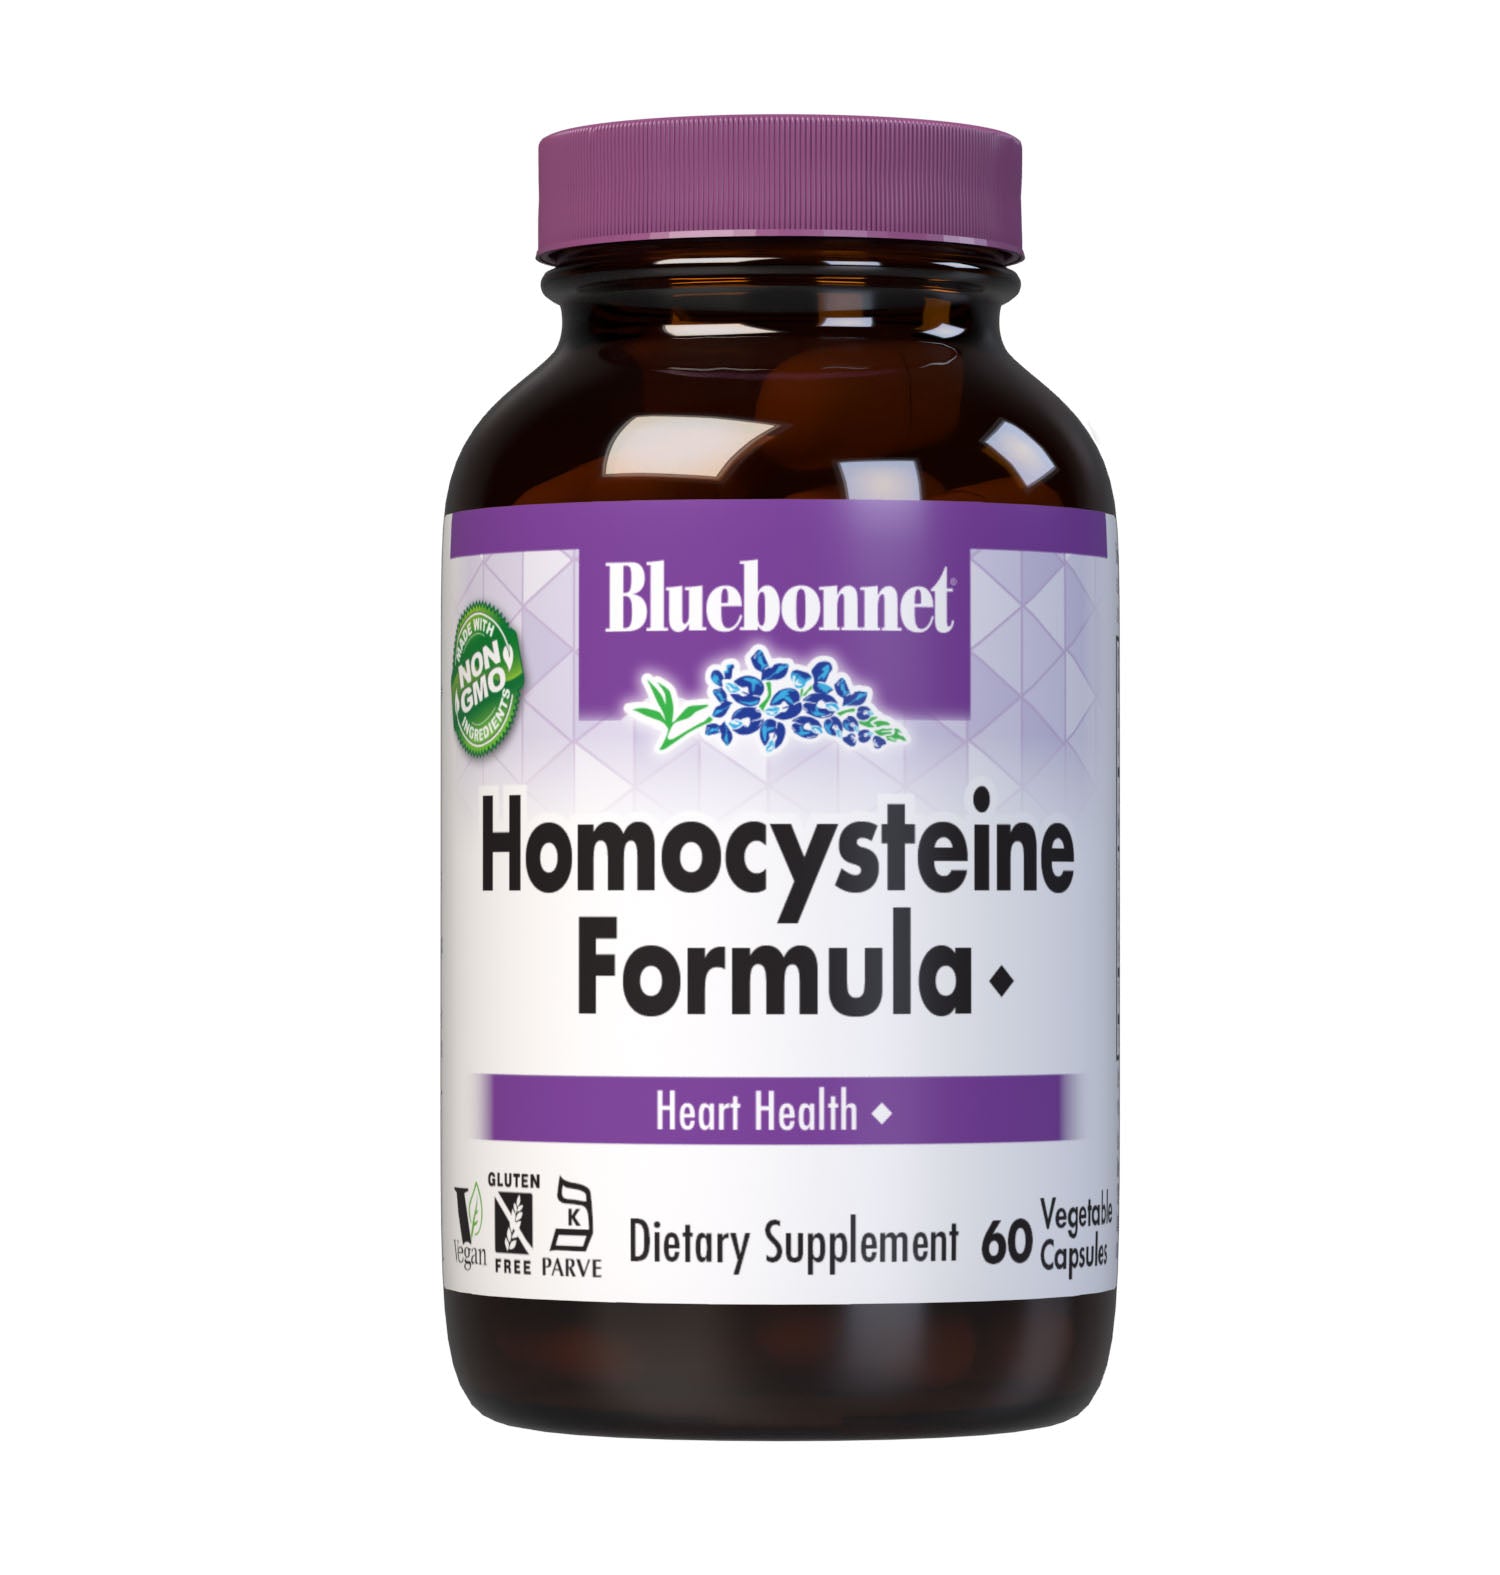 Bluebonnet’s Homocysteine Formula 60 Vegetable Capsules are formulated with vitamin B6, vitamin B12 and folic acid, along with trimethylglycine derived from non-GMO beets to support heart health and homocysteine levels already within the normal range. #size_60 count